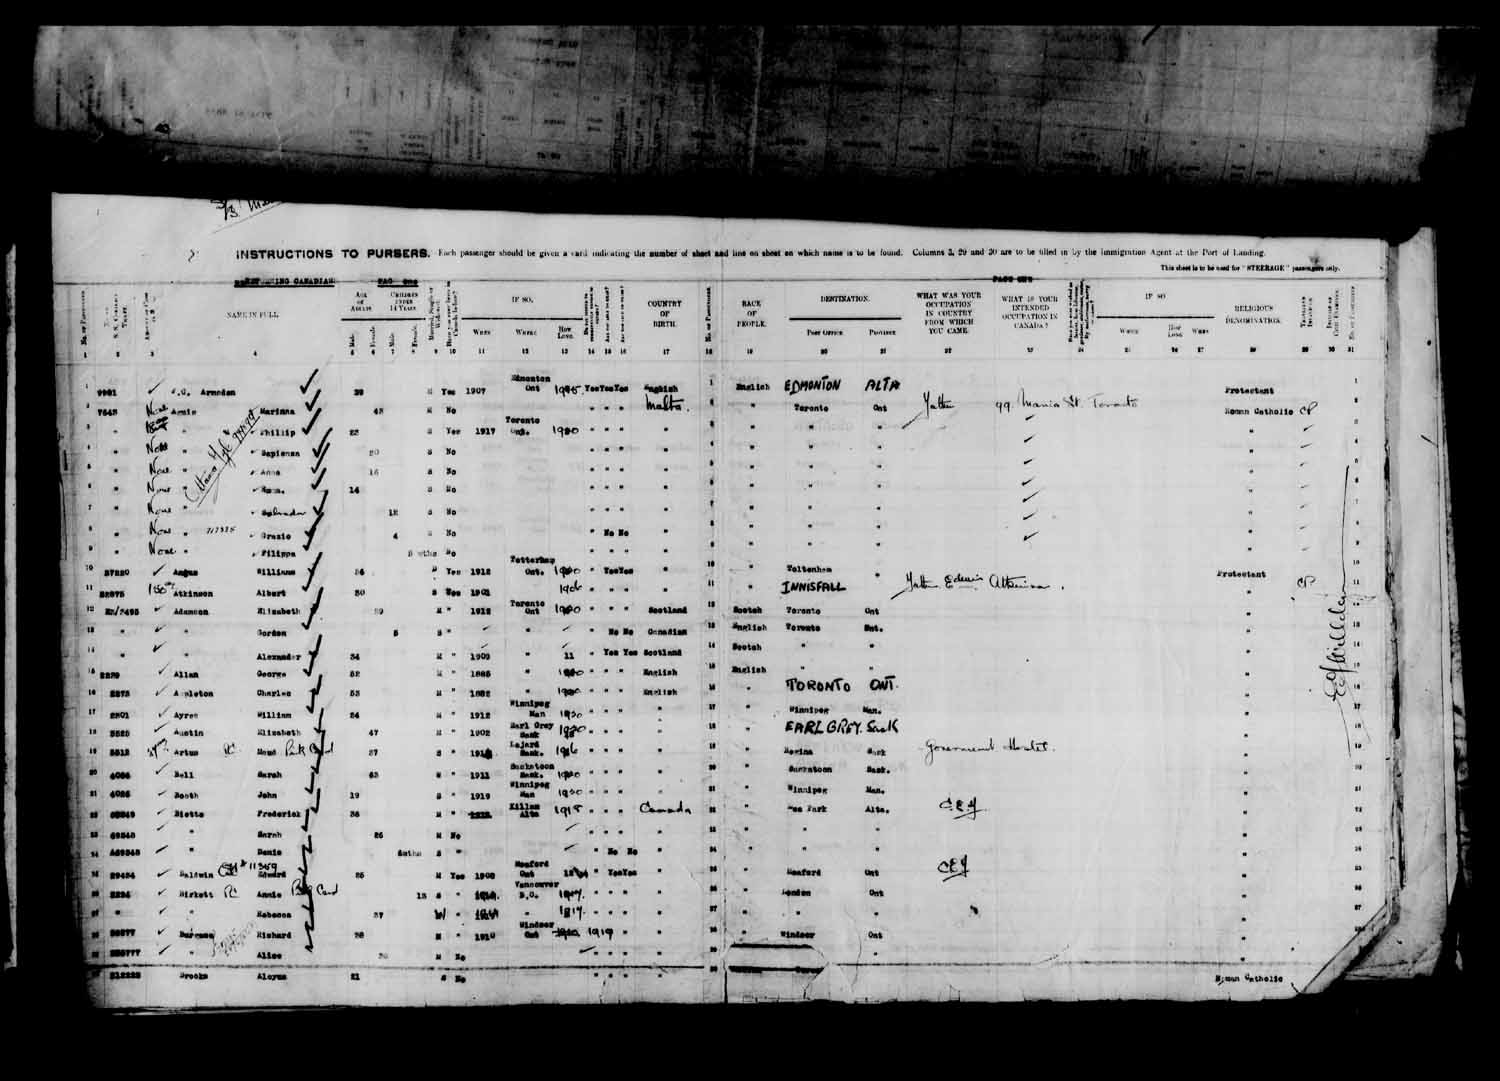 Digitized page of Passenger Lists for Image No.: e003610628